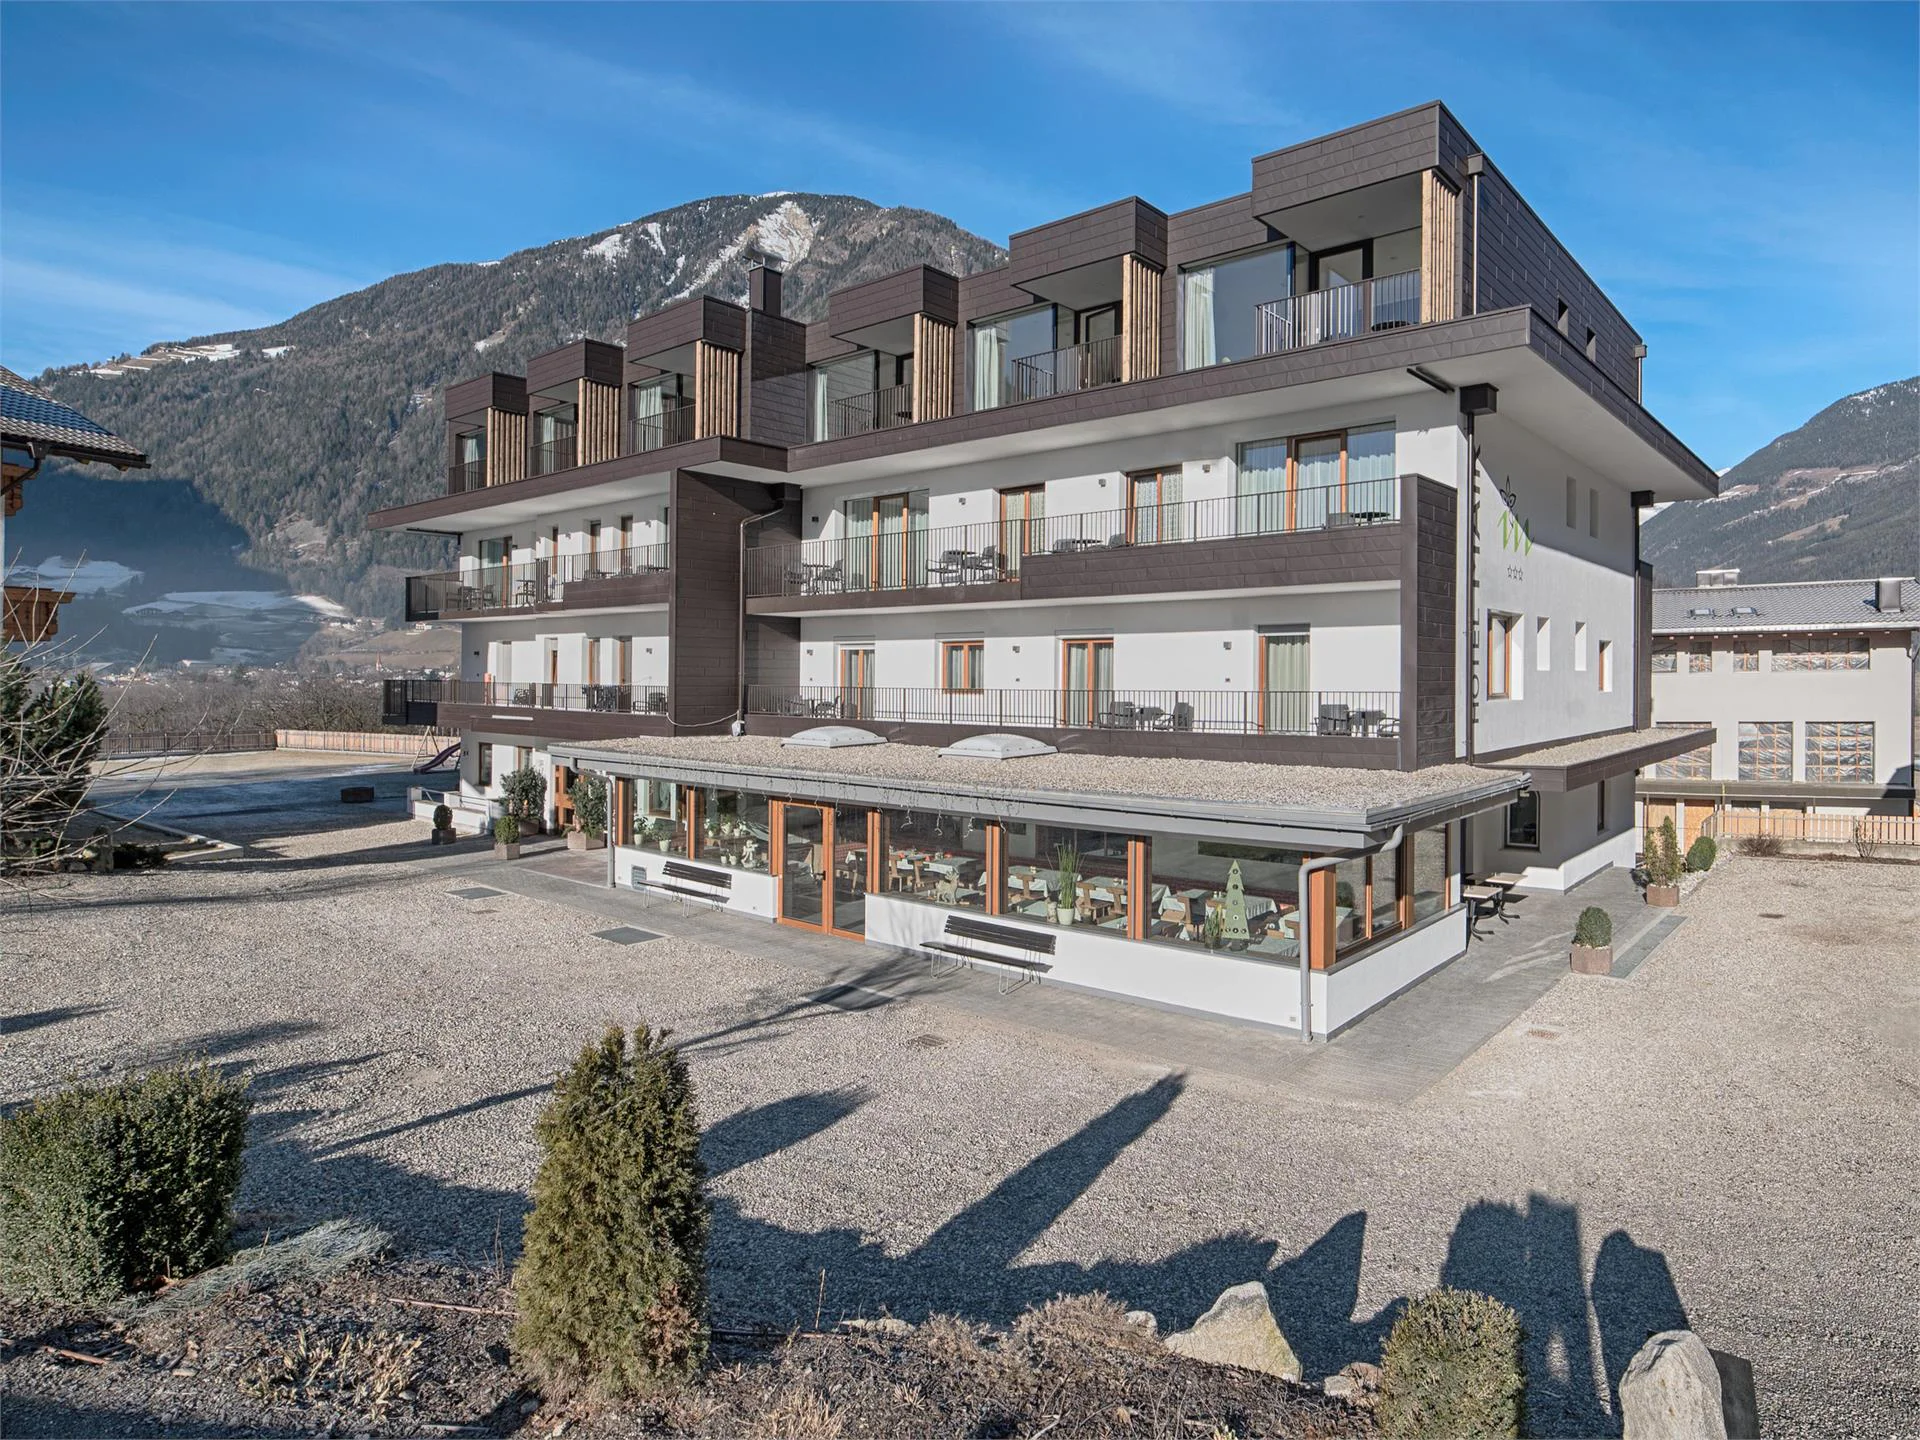 Hotel Mair Sand in Taufers/Campo Tures 2 suedtirol.info